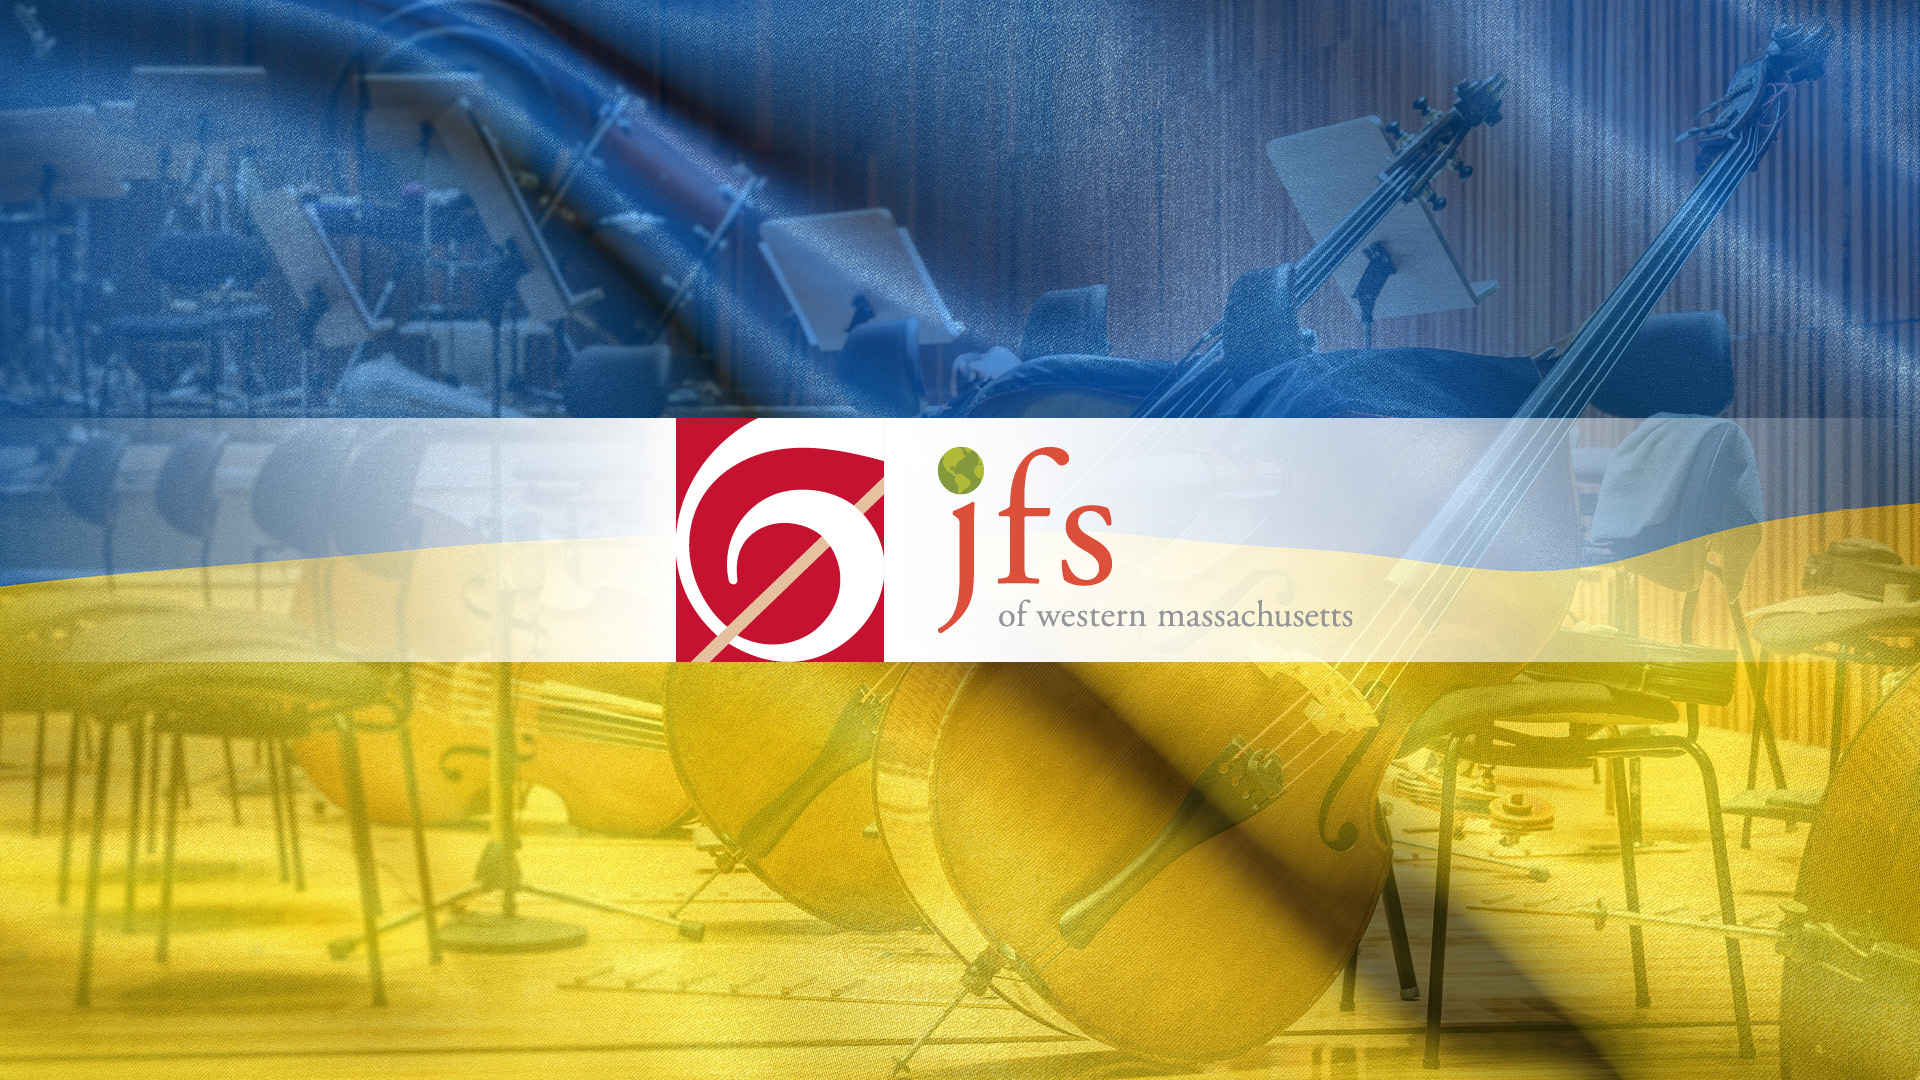 graphic with SSO and JFS logos over background of Ukranian flag and symphonic instruments